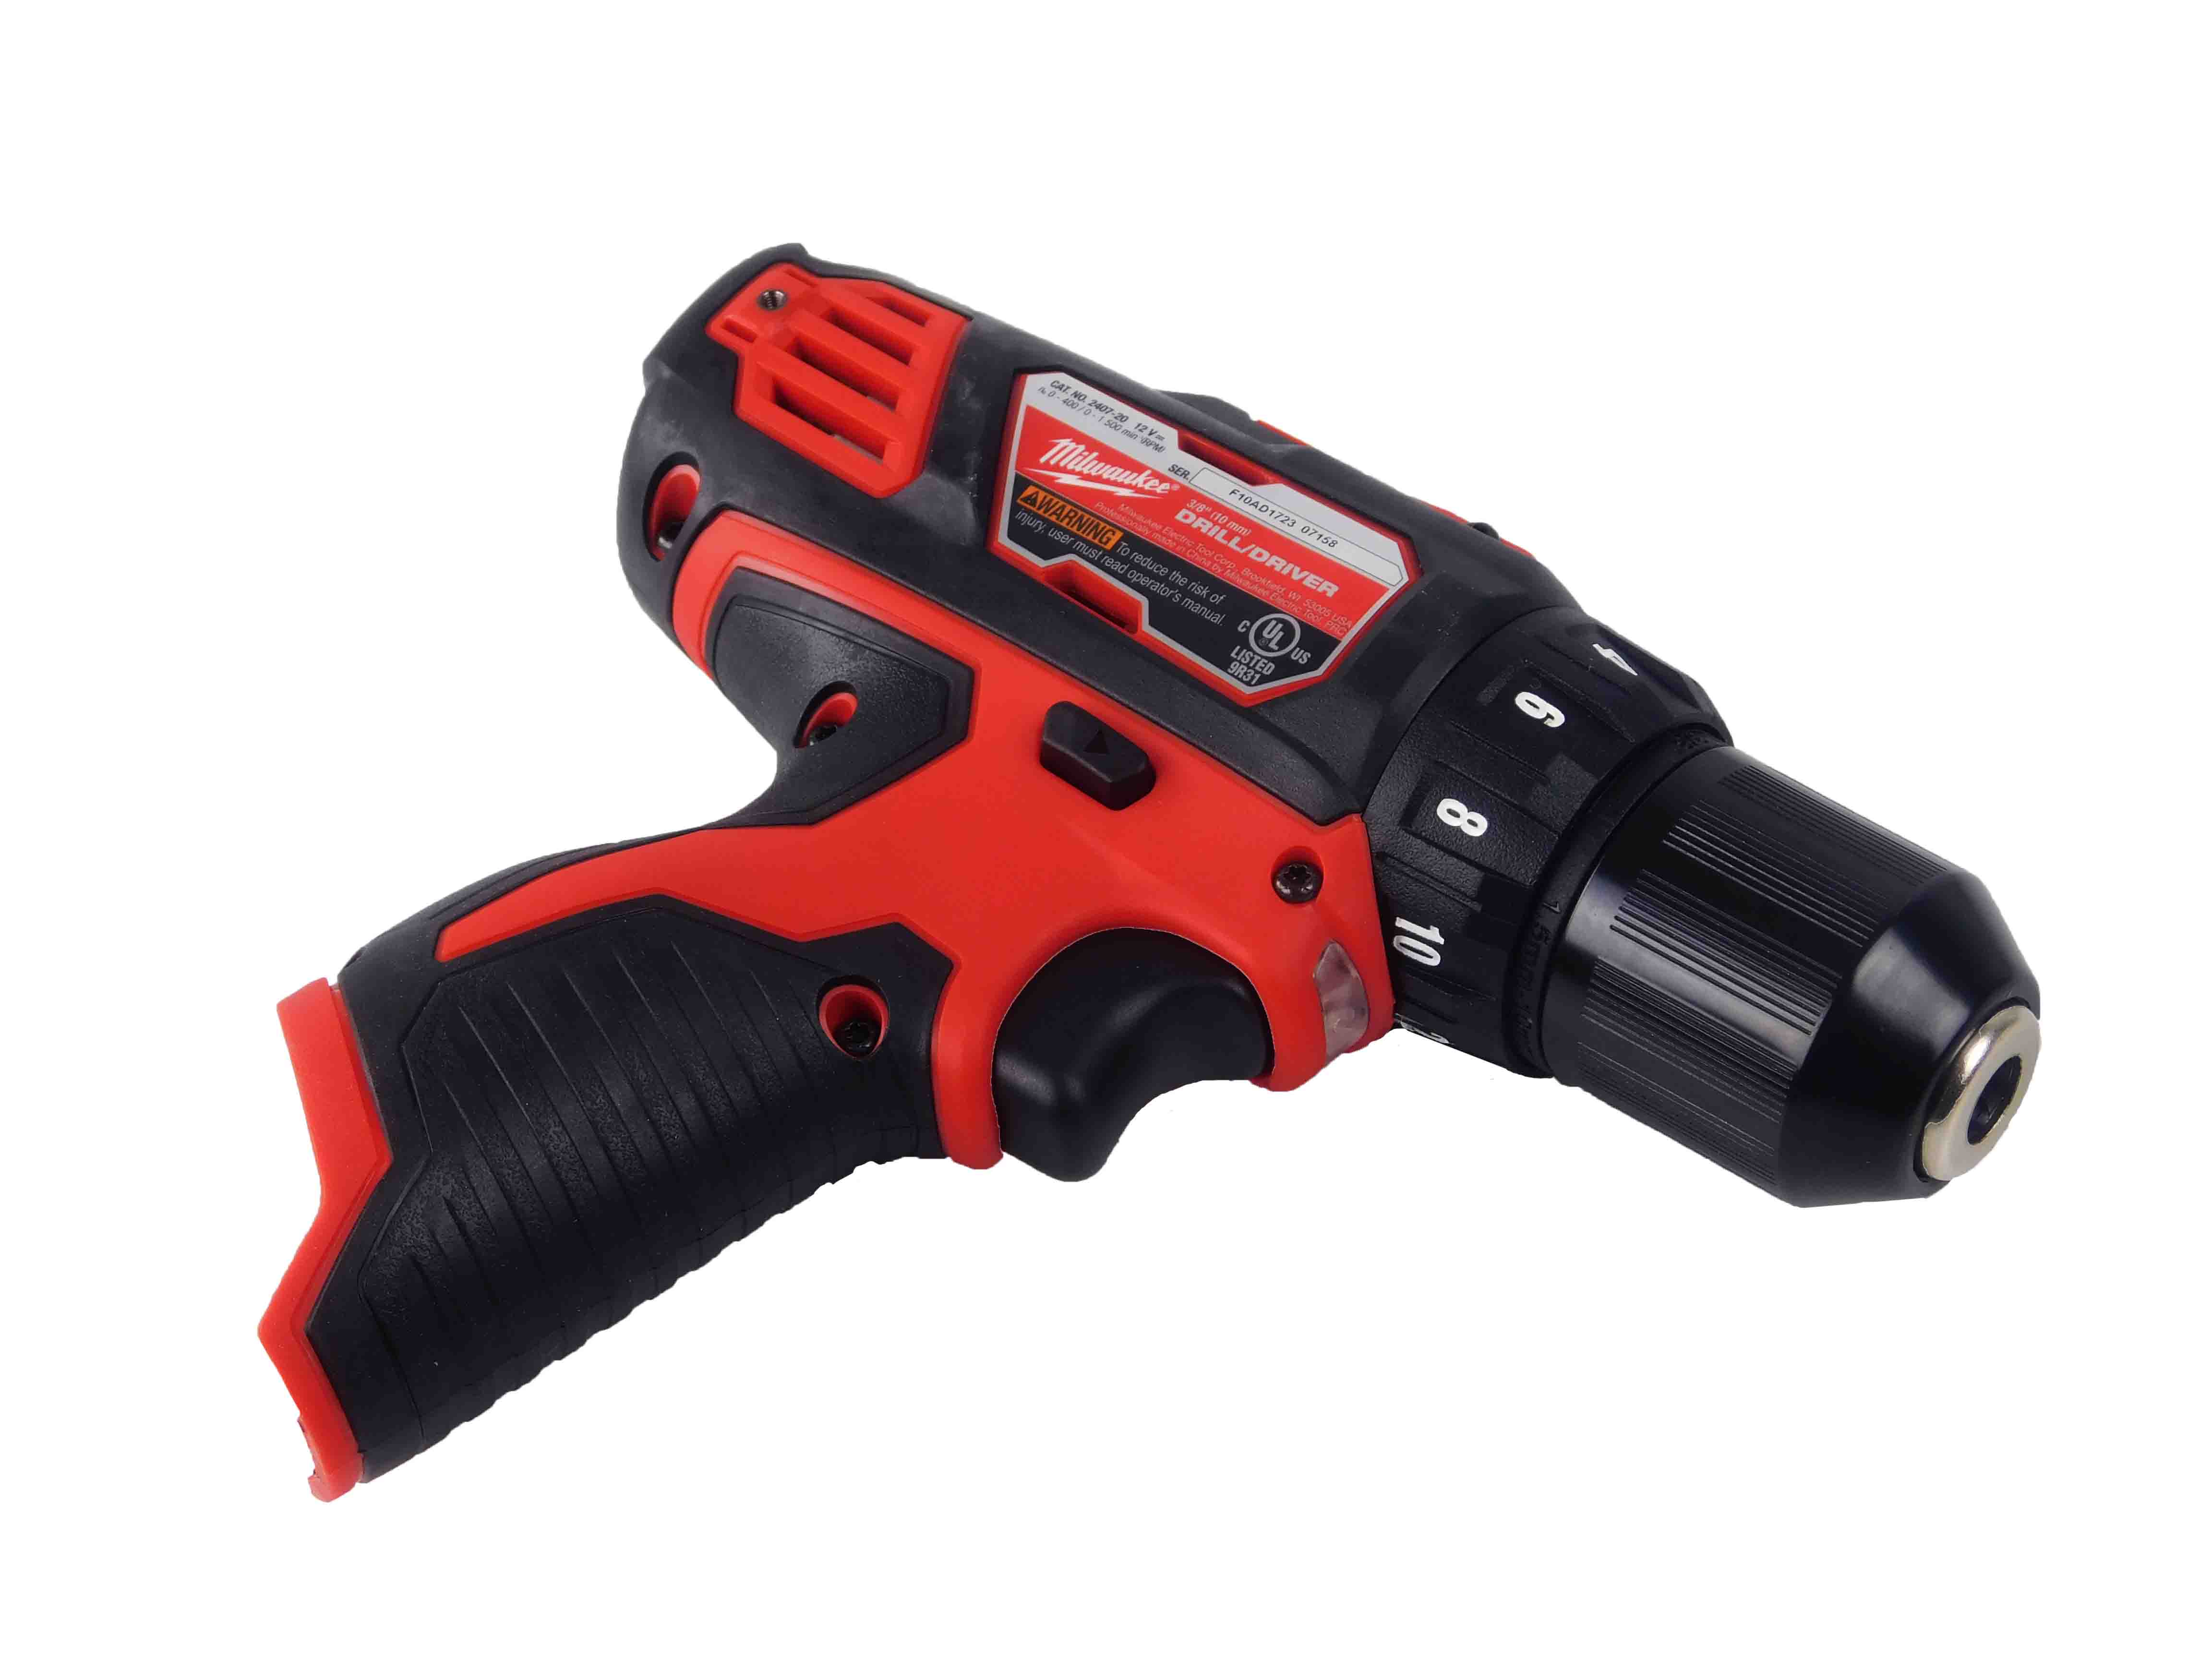 Milwaukee 2407-20 M12 12V Cordless Lithium-Ion 3/8 in. Drill/Driver (Tool Only)